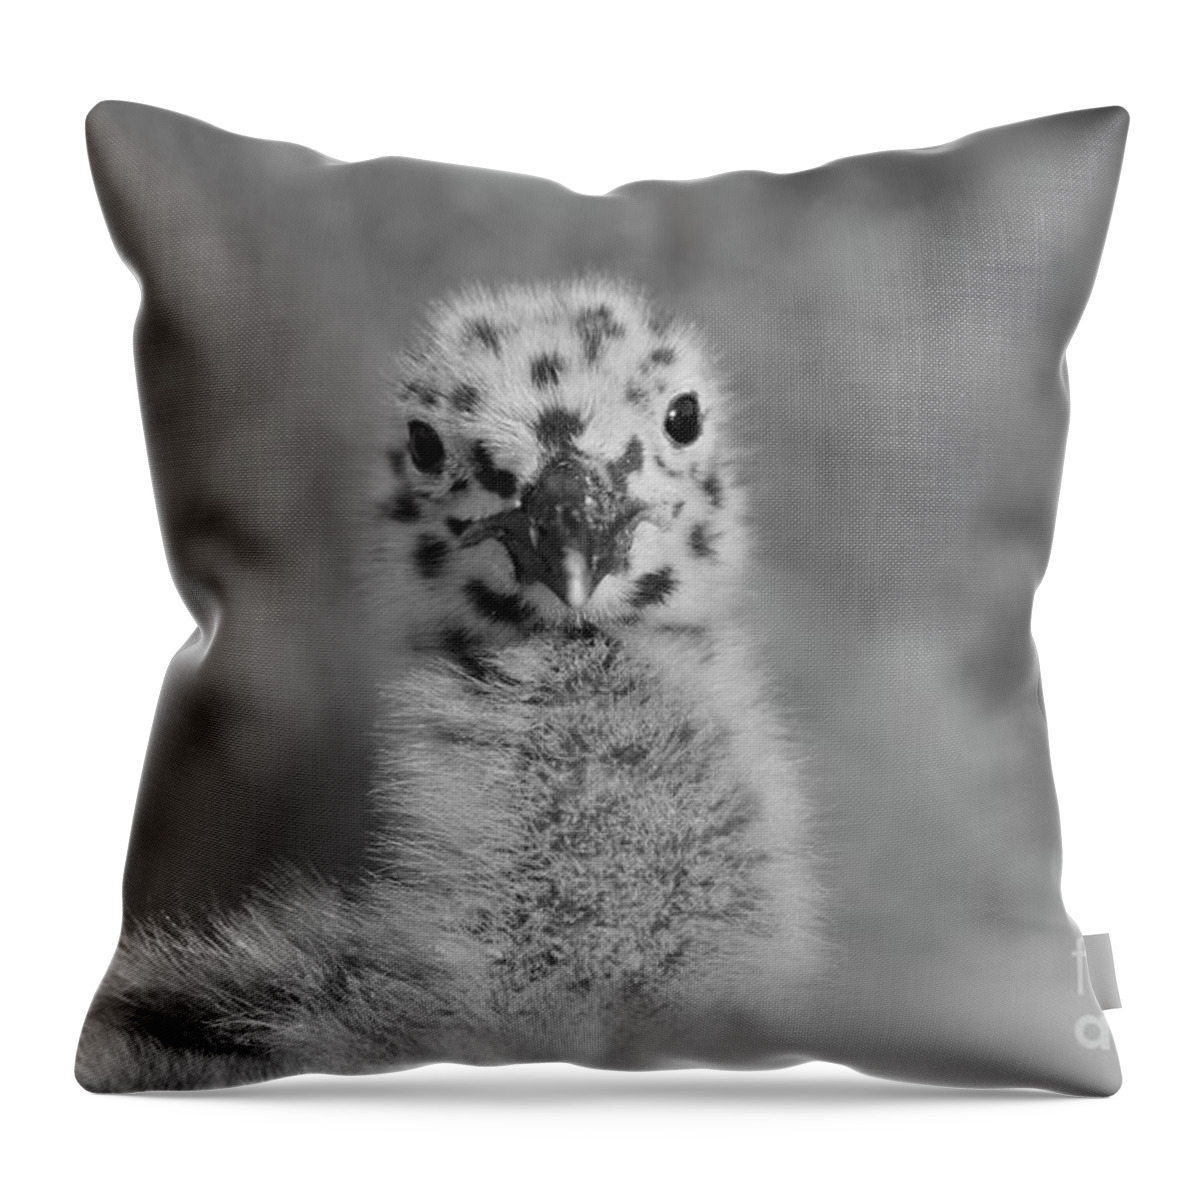 Birds Throw Pillow featuring the photograph Baby Western Seagull Spots by John F Tsumas